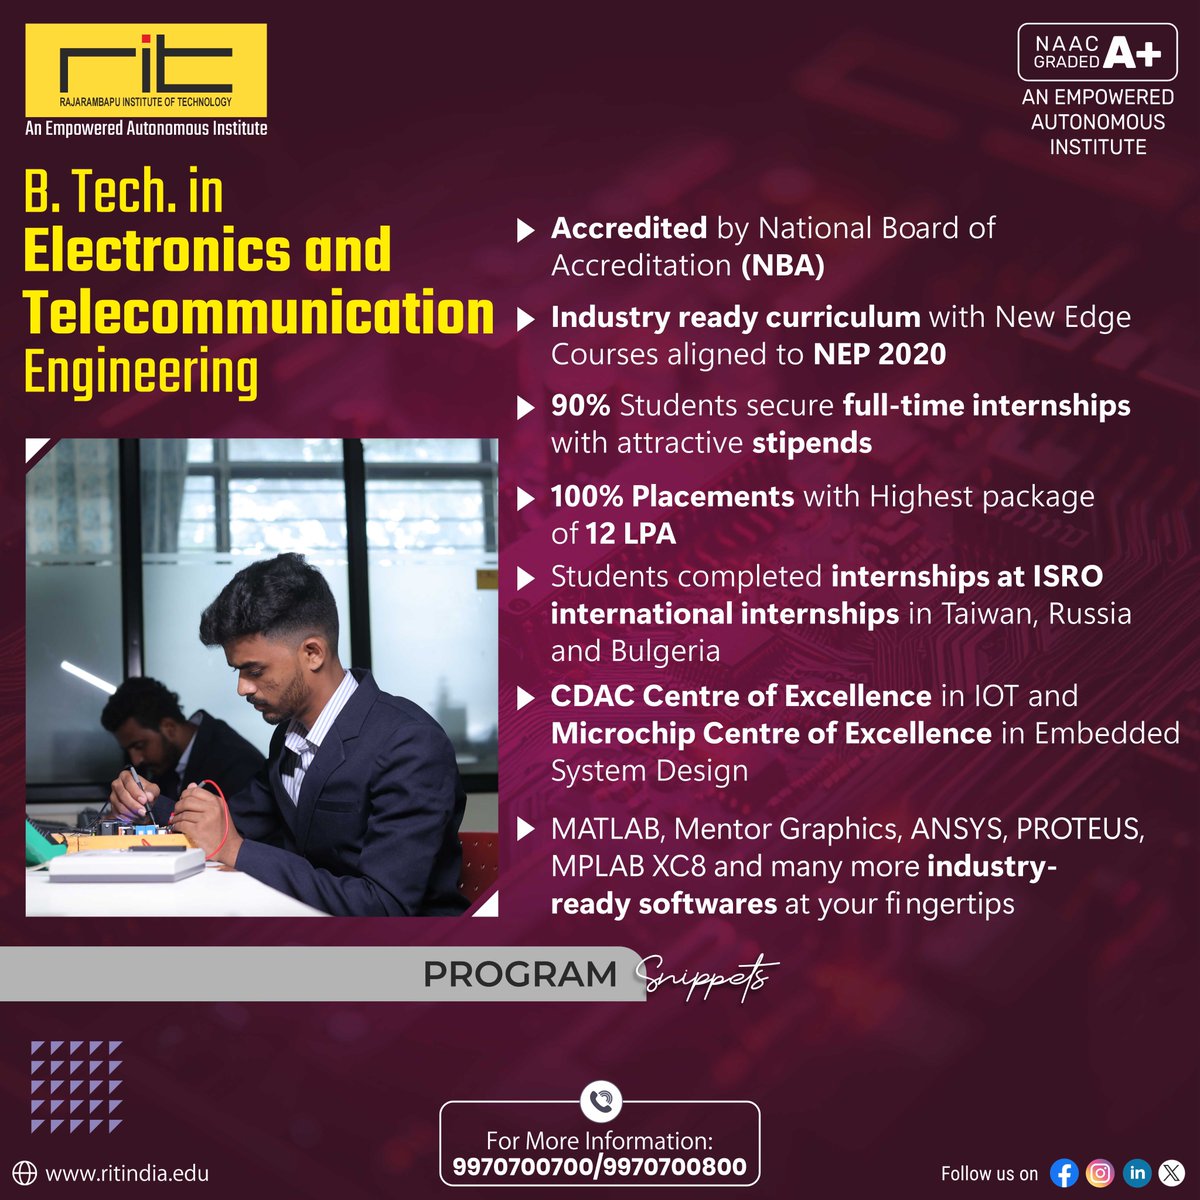 Shape the future of connectivity with our Electronics and Telecommunication Engineering program! Apply now to join a dynamic field driving innovation and technological advancement.
Website: ritindia.edu

🌐📡 #EngineeringAdmissions #ETCE #FutureEngineers